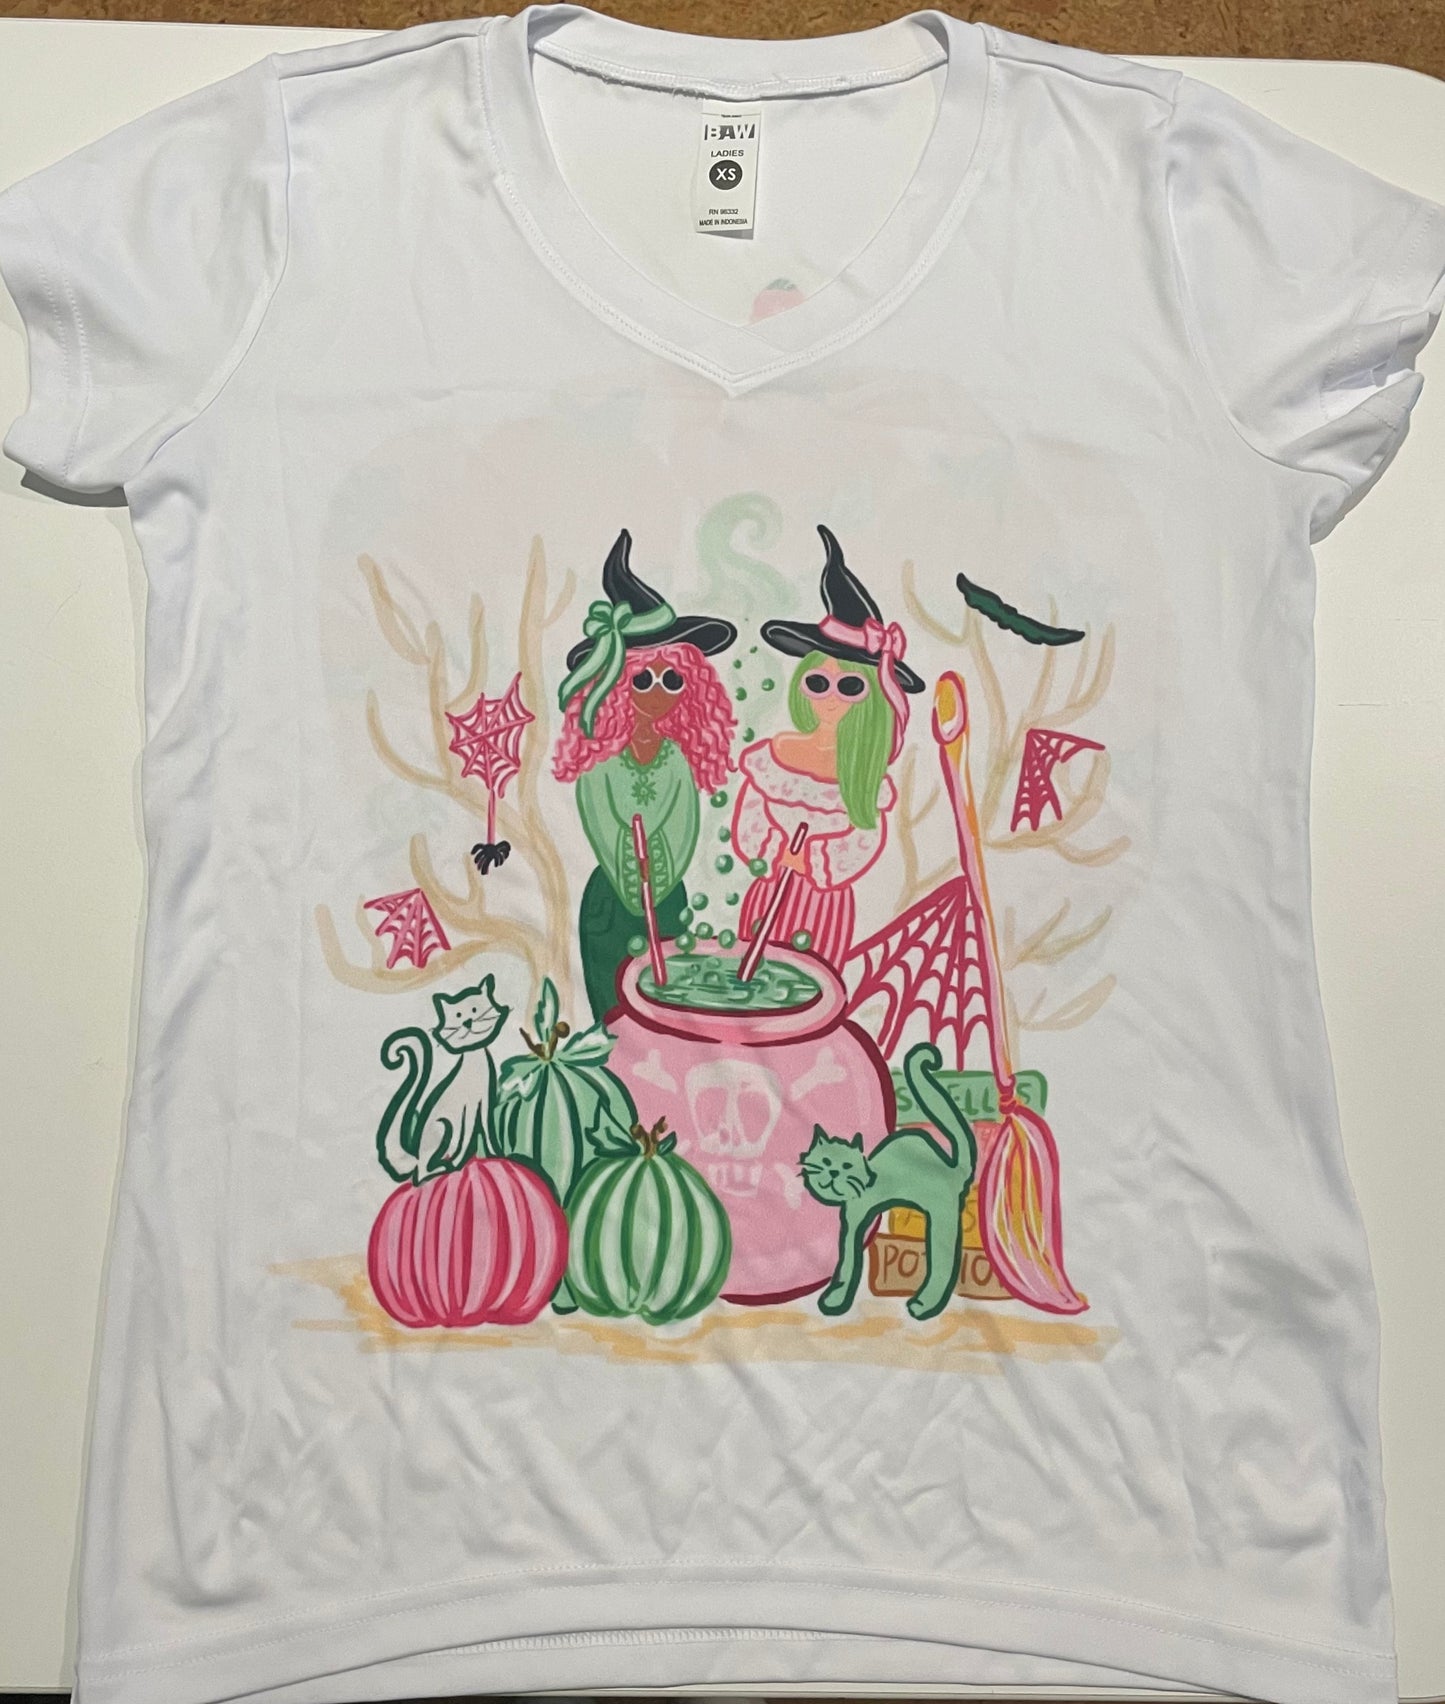 Friends That Lilly Pink and Green Witches Halloween Girls Illustration Shirts